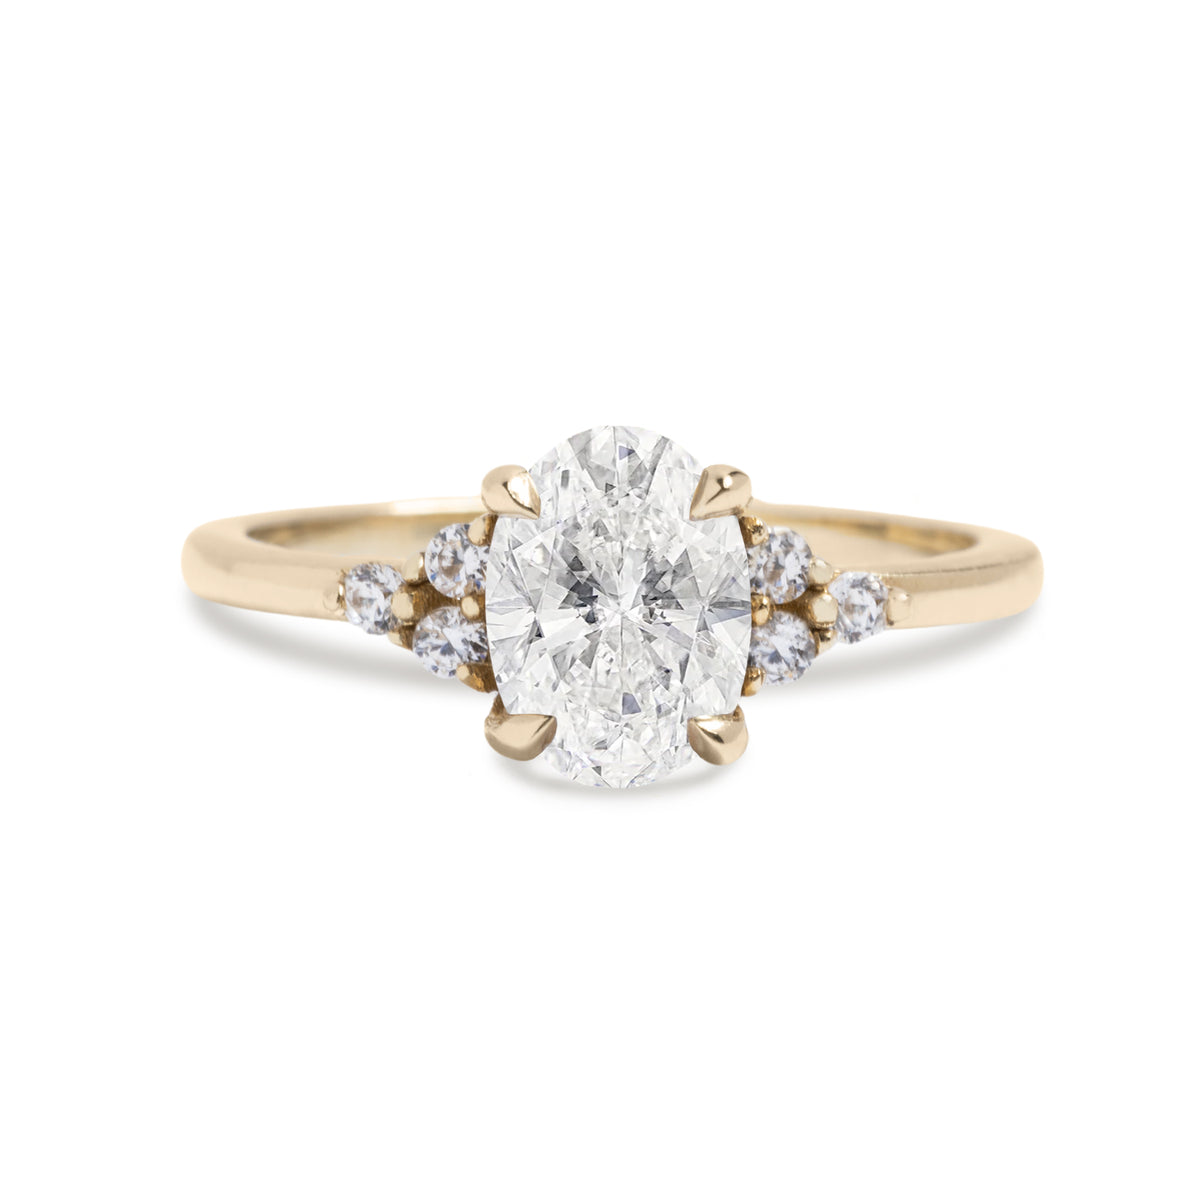 14k yellow, white, or rose gold diamond semi custom engagement ring with triple accent round brilliant diamonds on either side